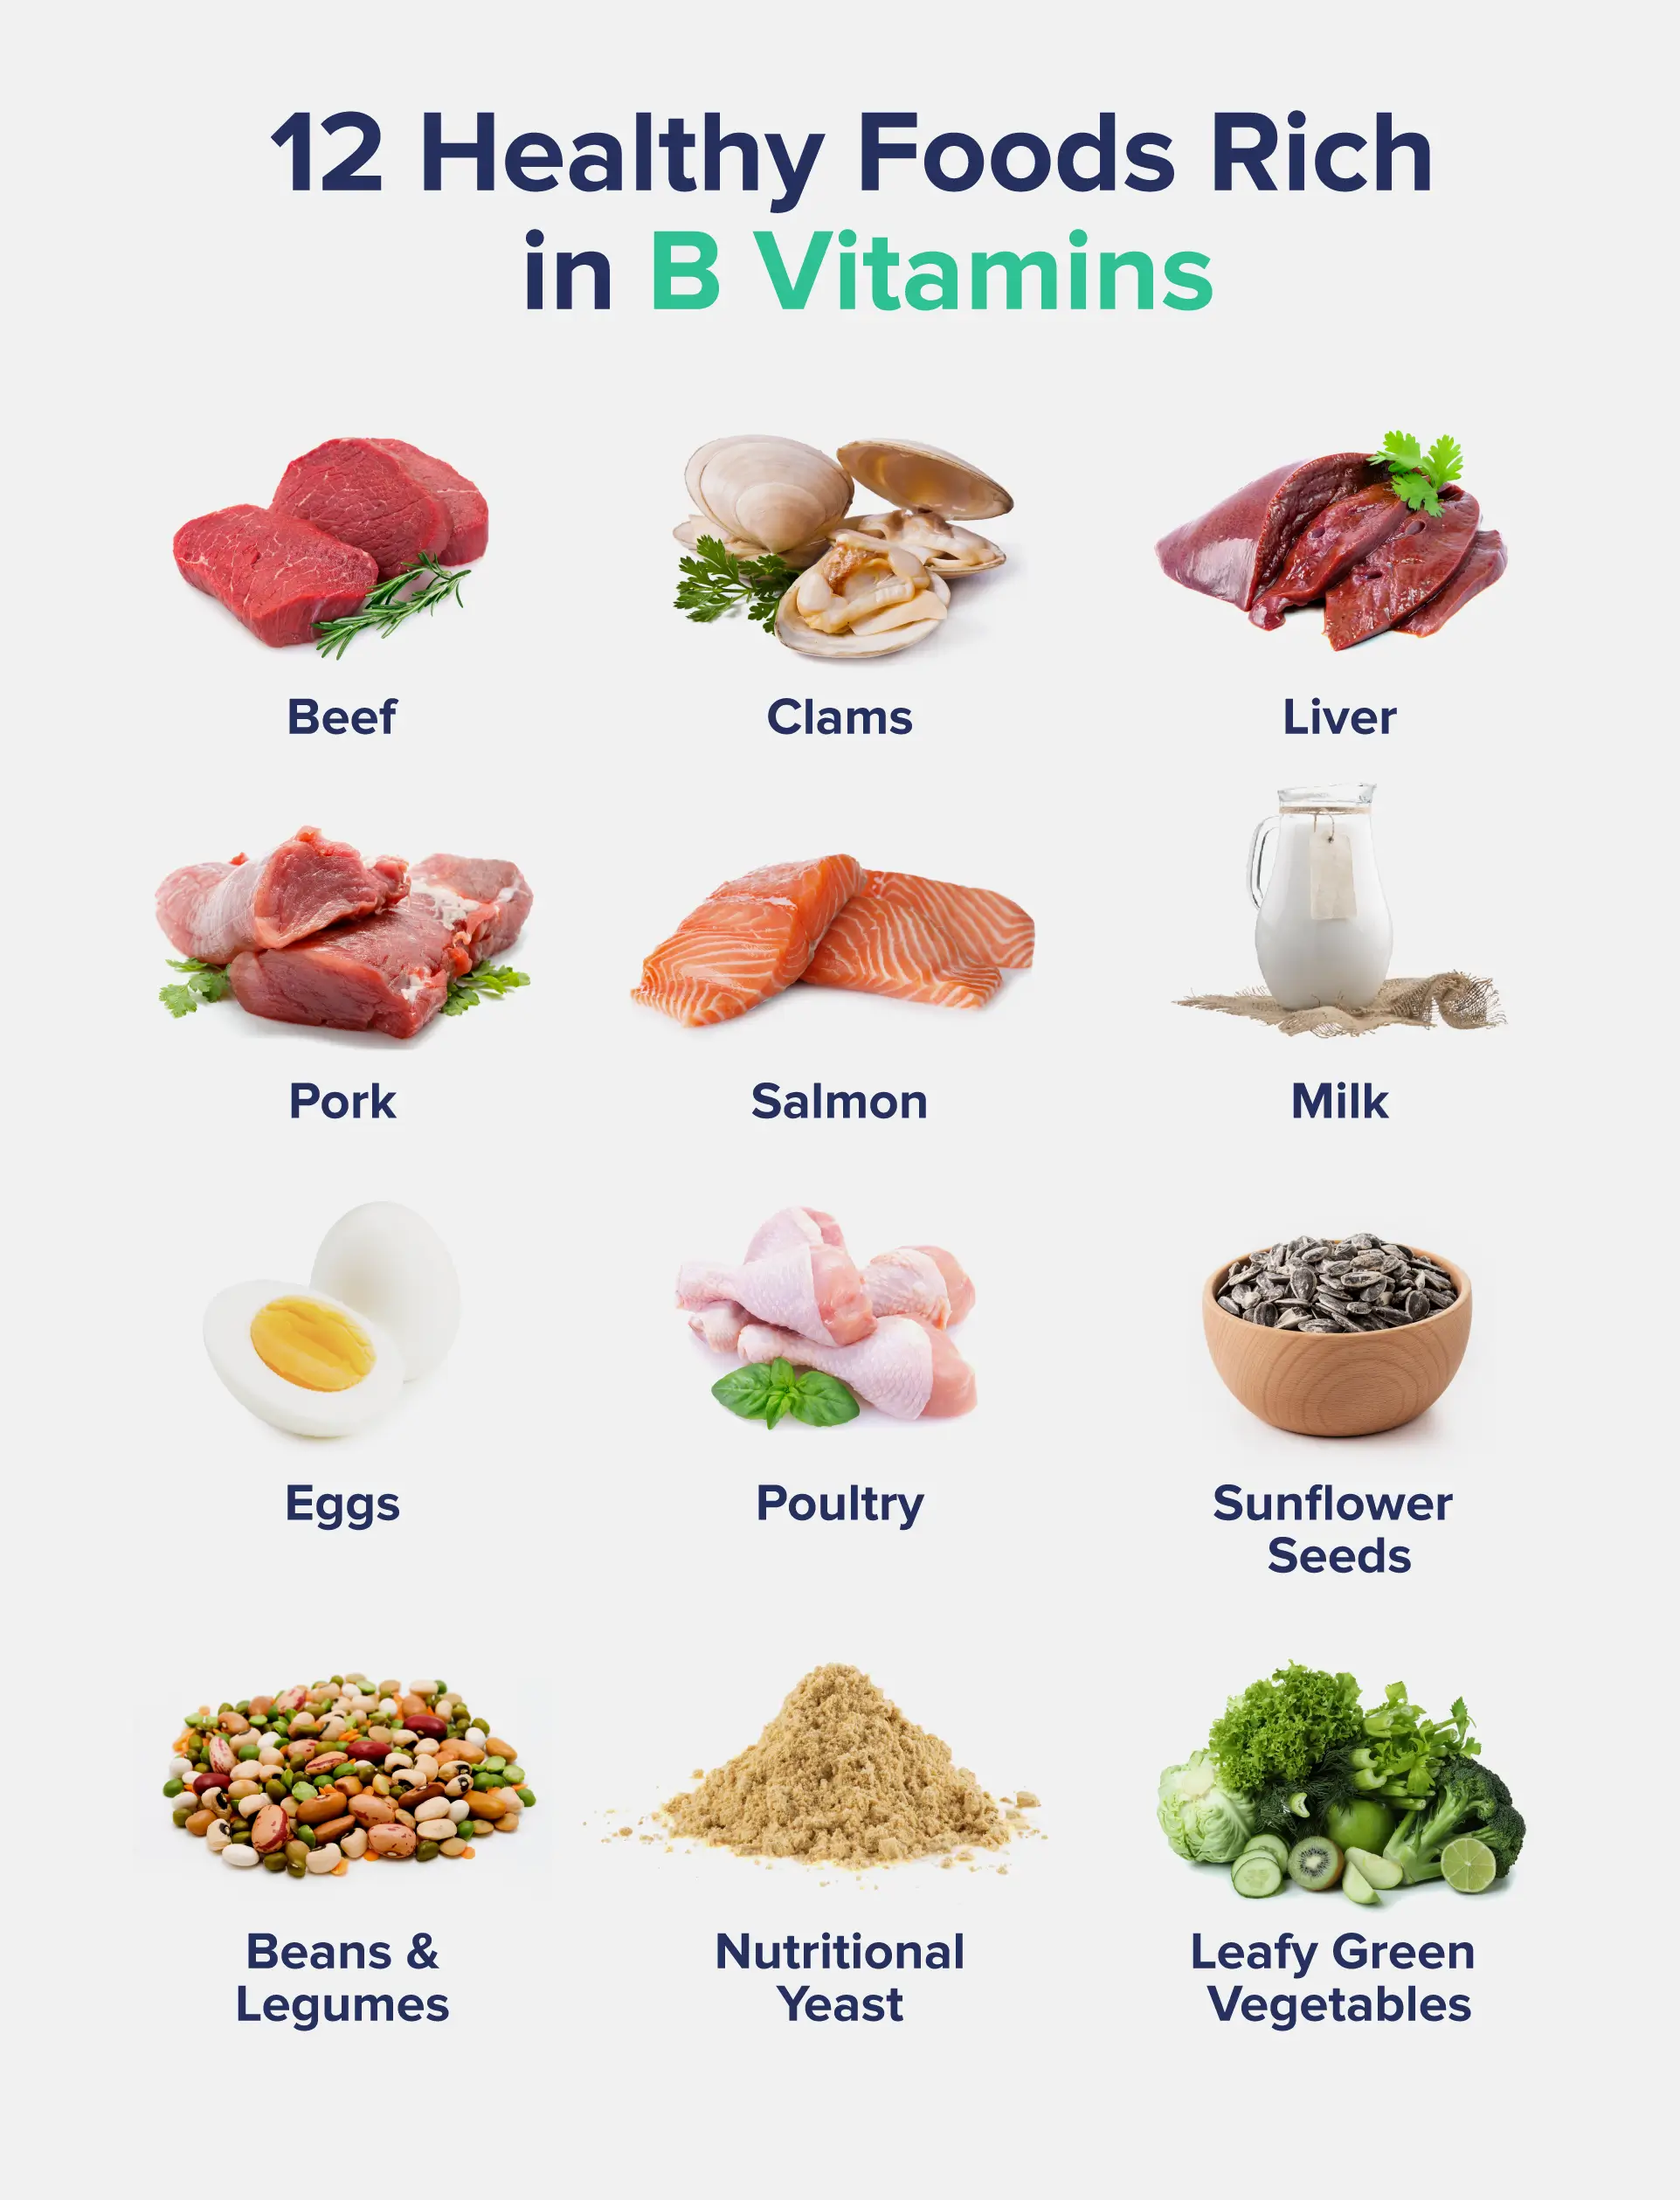 A graphic entitled "12 Healthy Foods Rich in B Vitamins" with labeled pictures of liver, beef, salmon, and more.